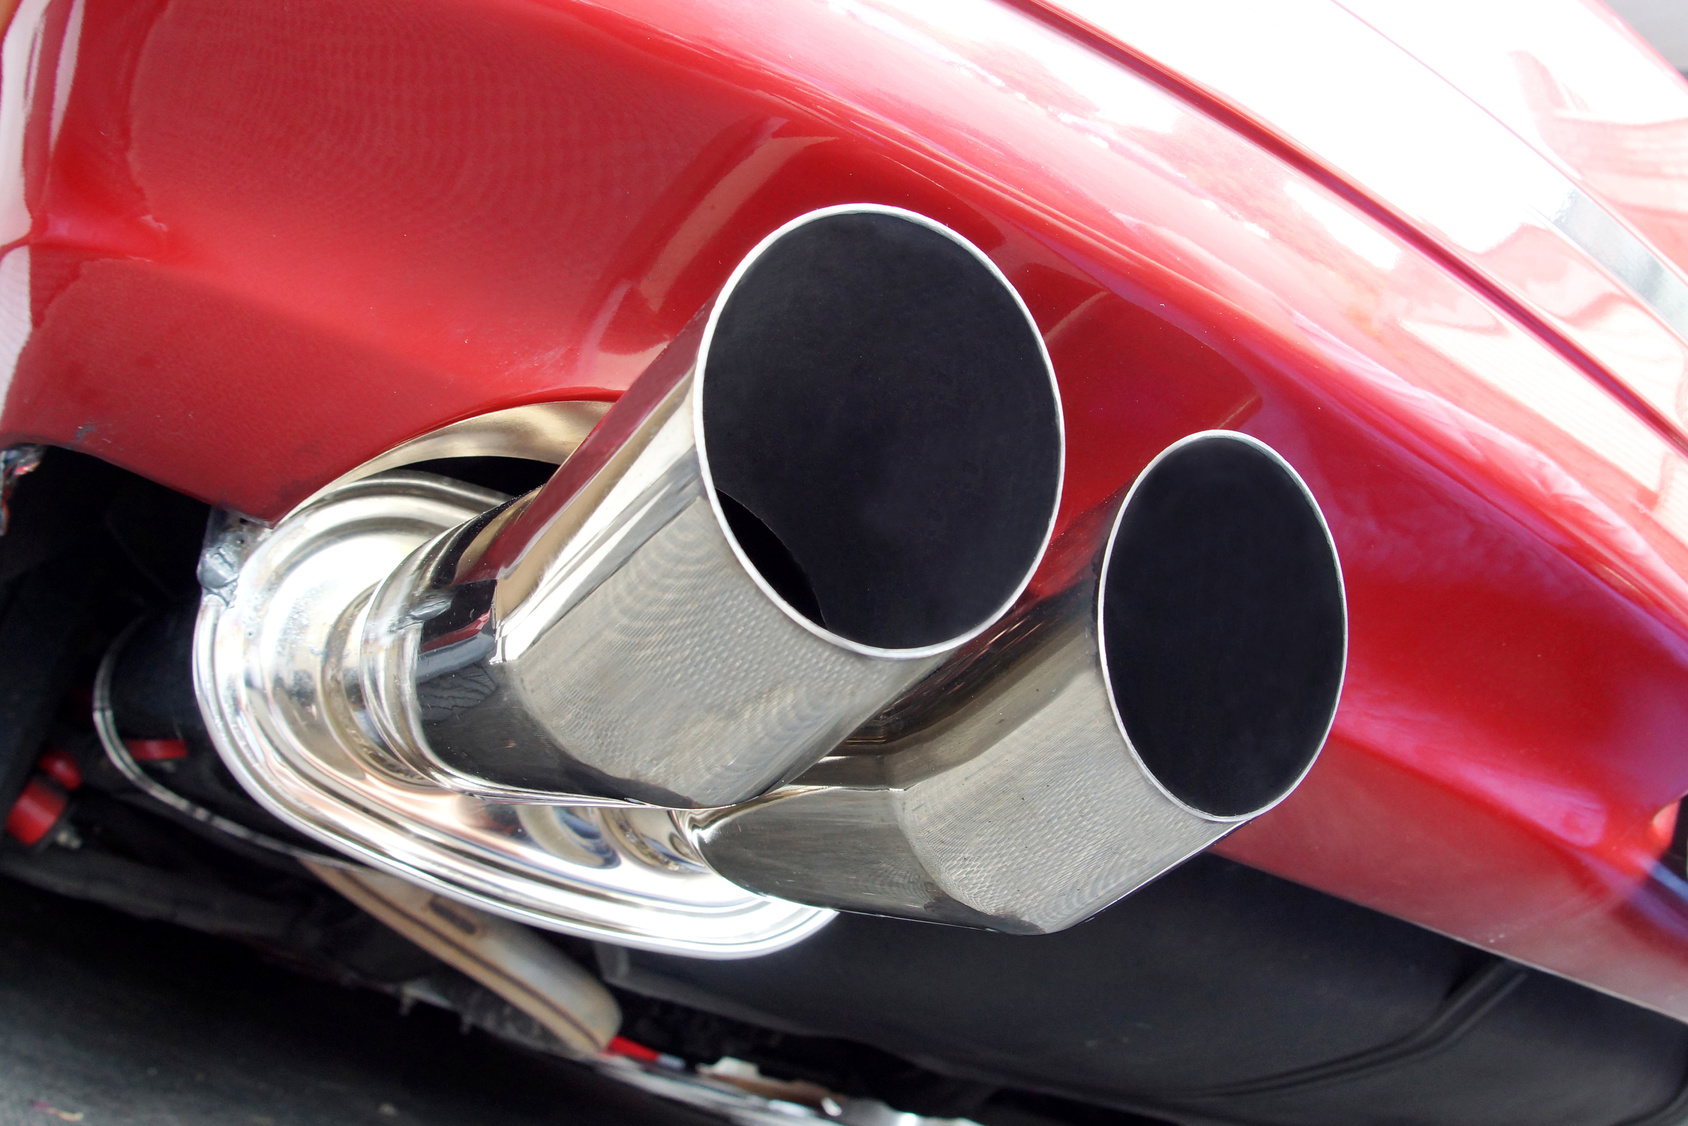 red car with silver exhaust in close-up